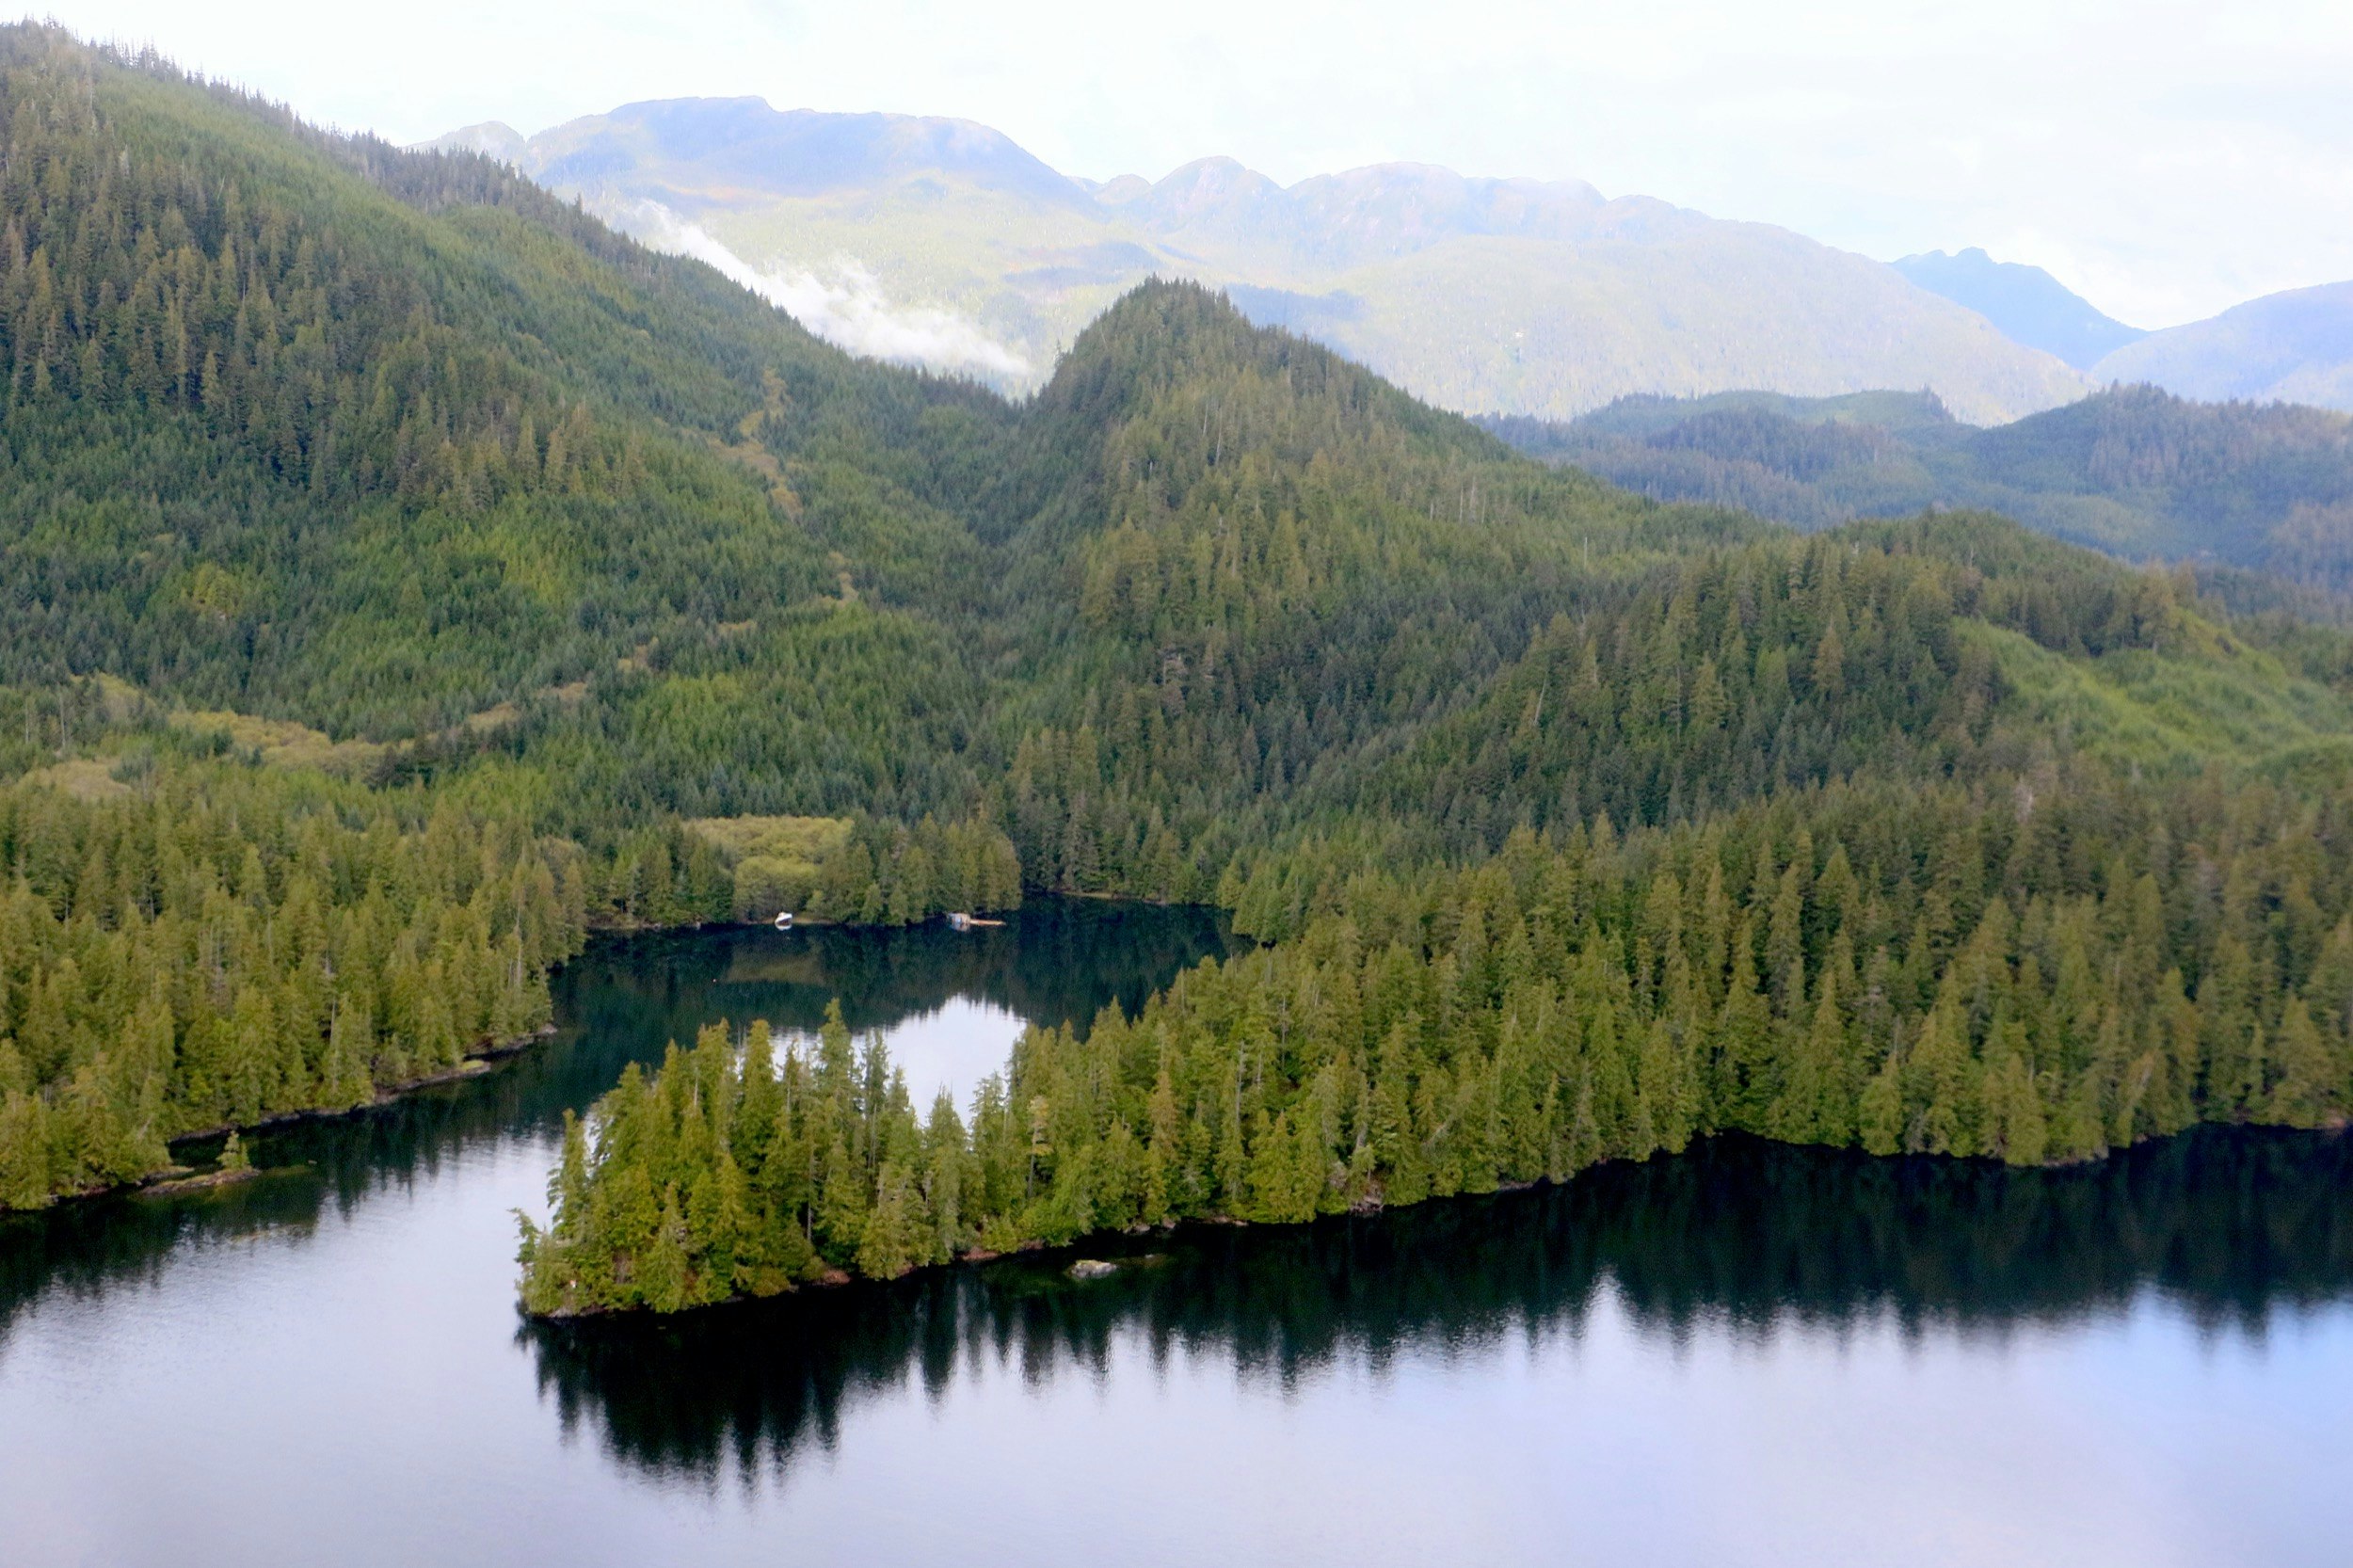 Looking down on a woodland fjord in Alaska's Tongass National Forest